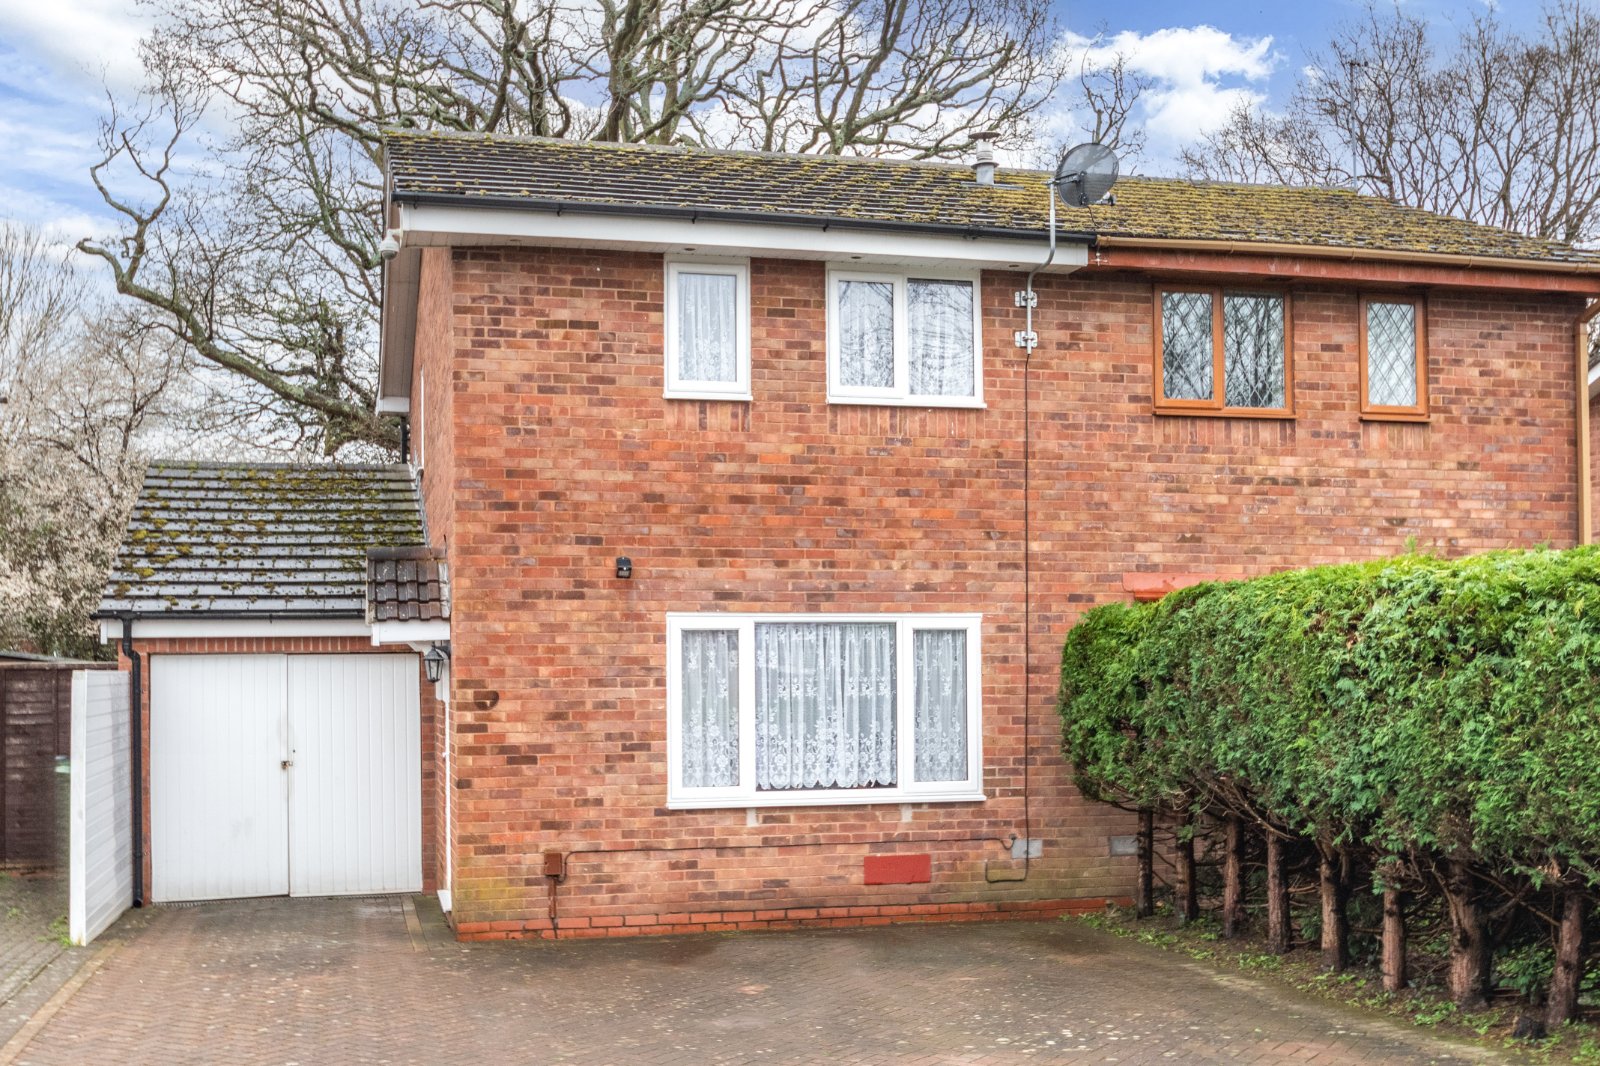 2 bed house for sale in Tenbury Close, Redditch - Property Image 1